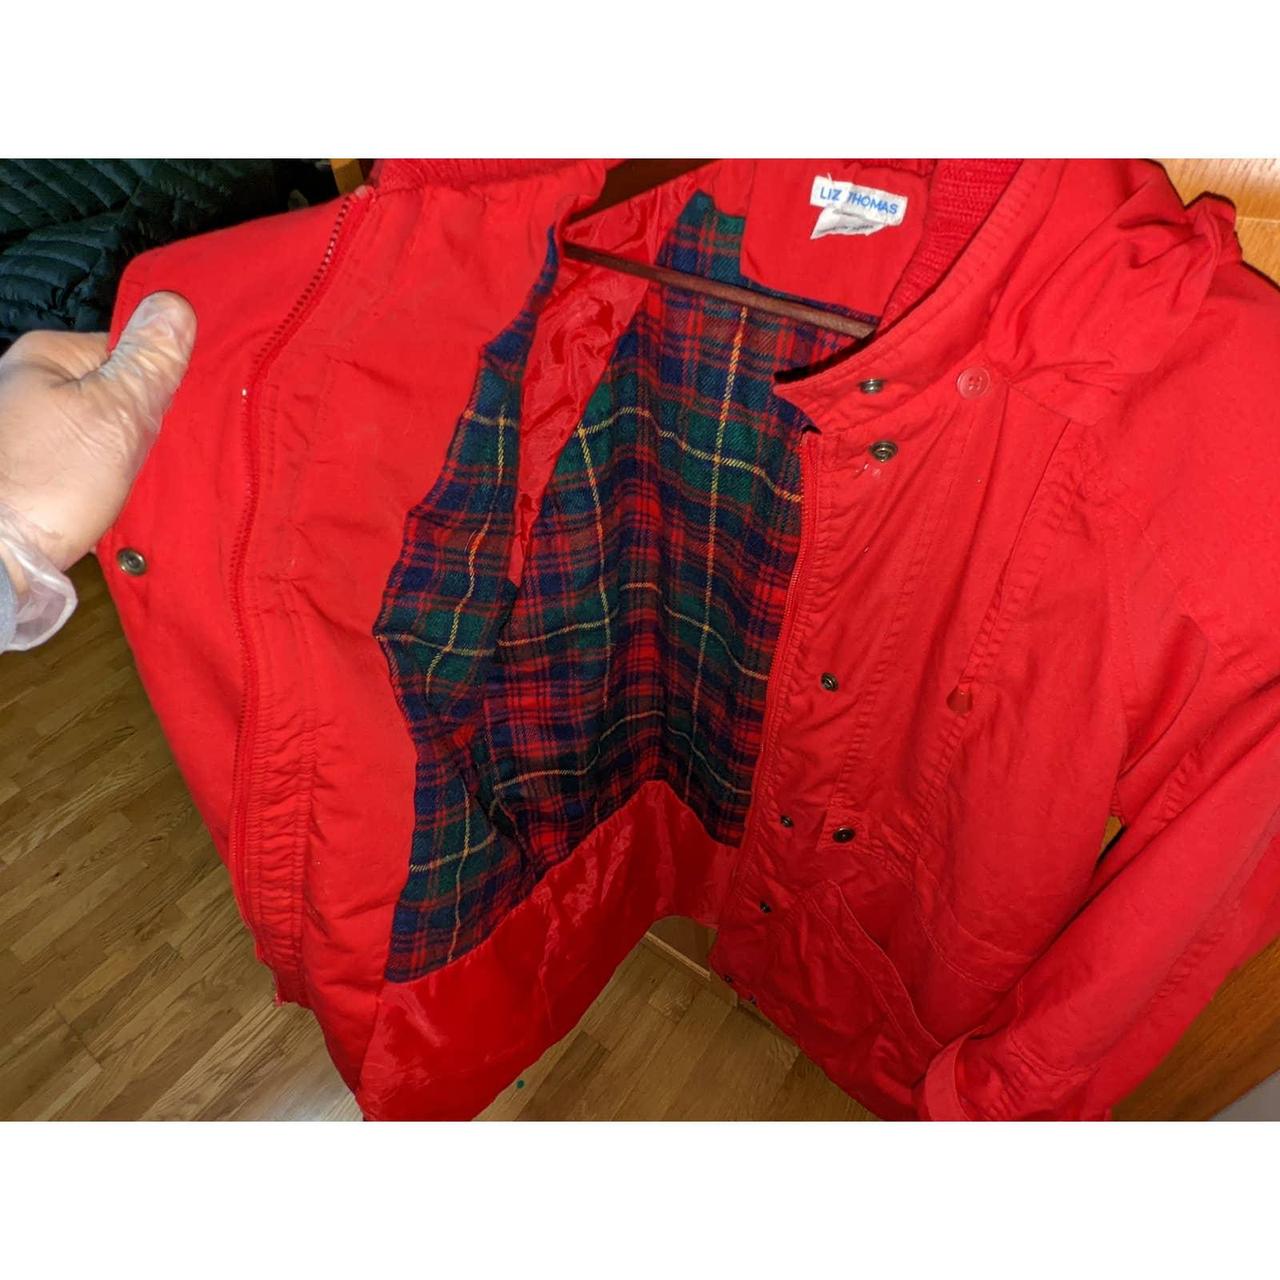 Women's Red and Green Jacket (4)